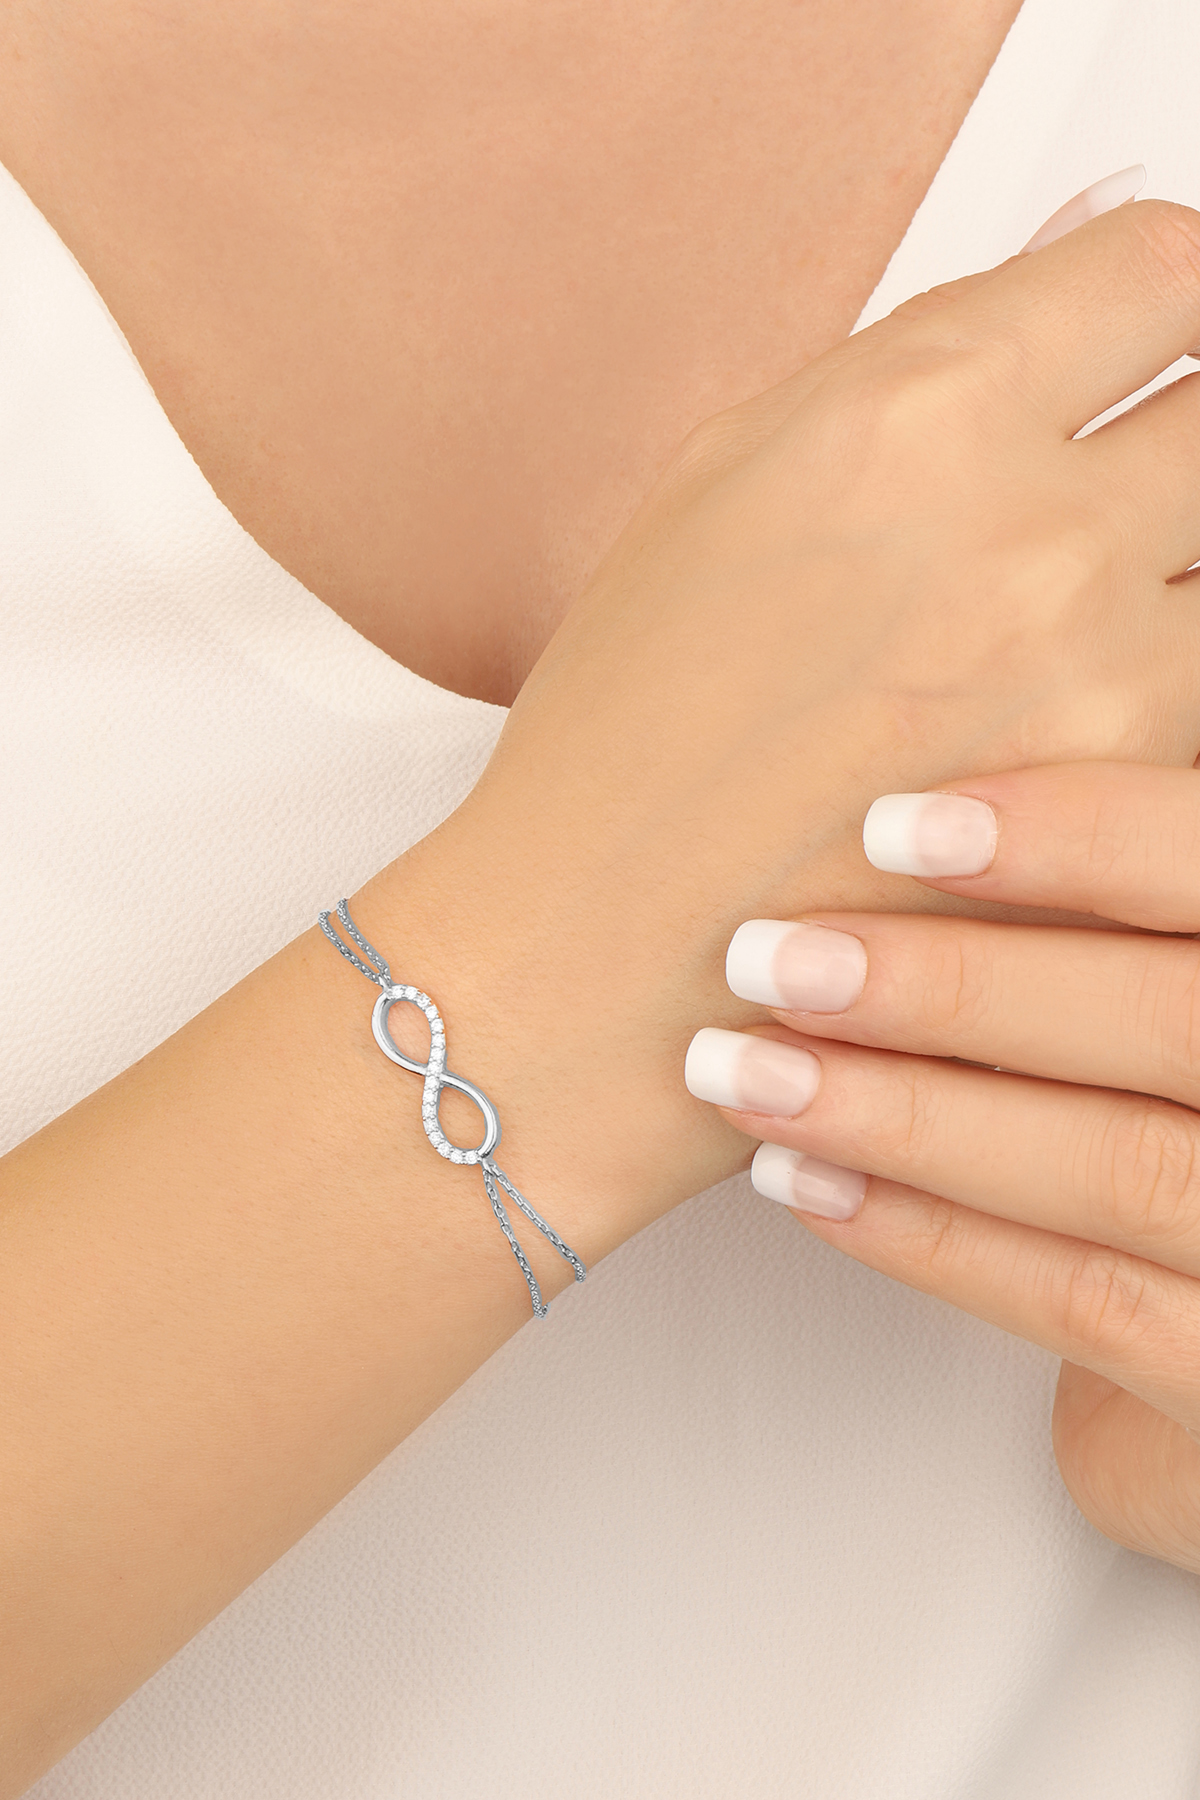 Silver Infinity Bracelets, Assorted Colours (Pack of 2) | Bohemia Design  Wholesale